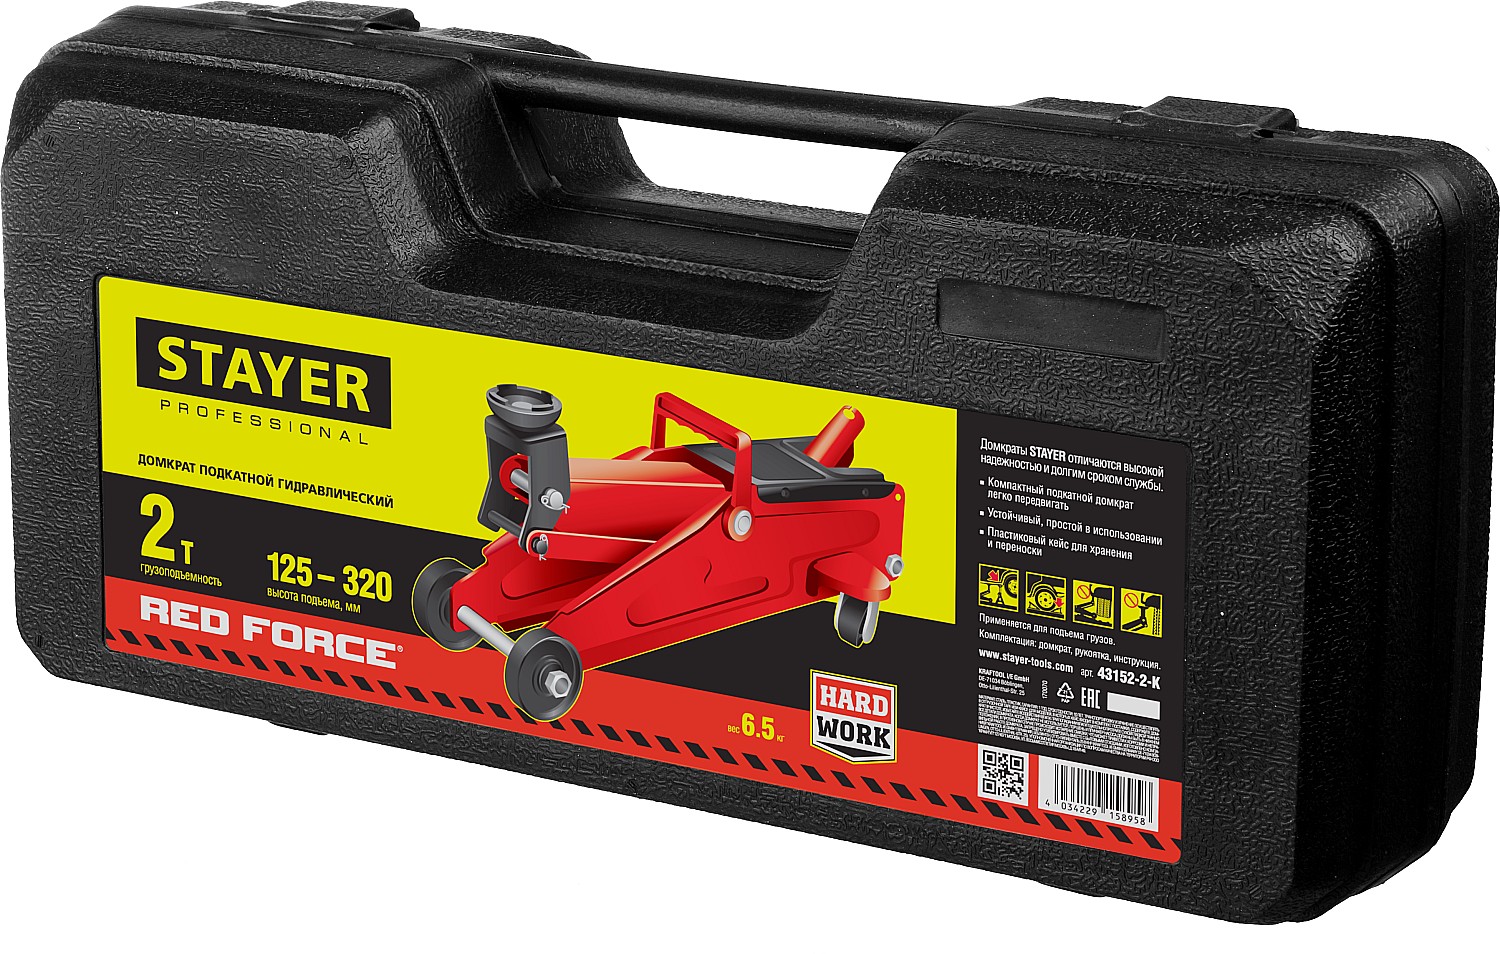 STAYER R-22 RED FORCE,  , 2 , 125 - 320 ,     /, Professional (43152-2-K)